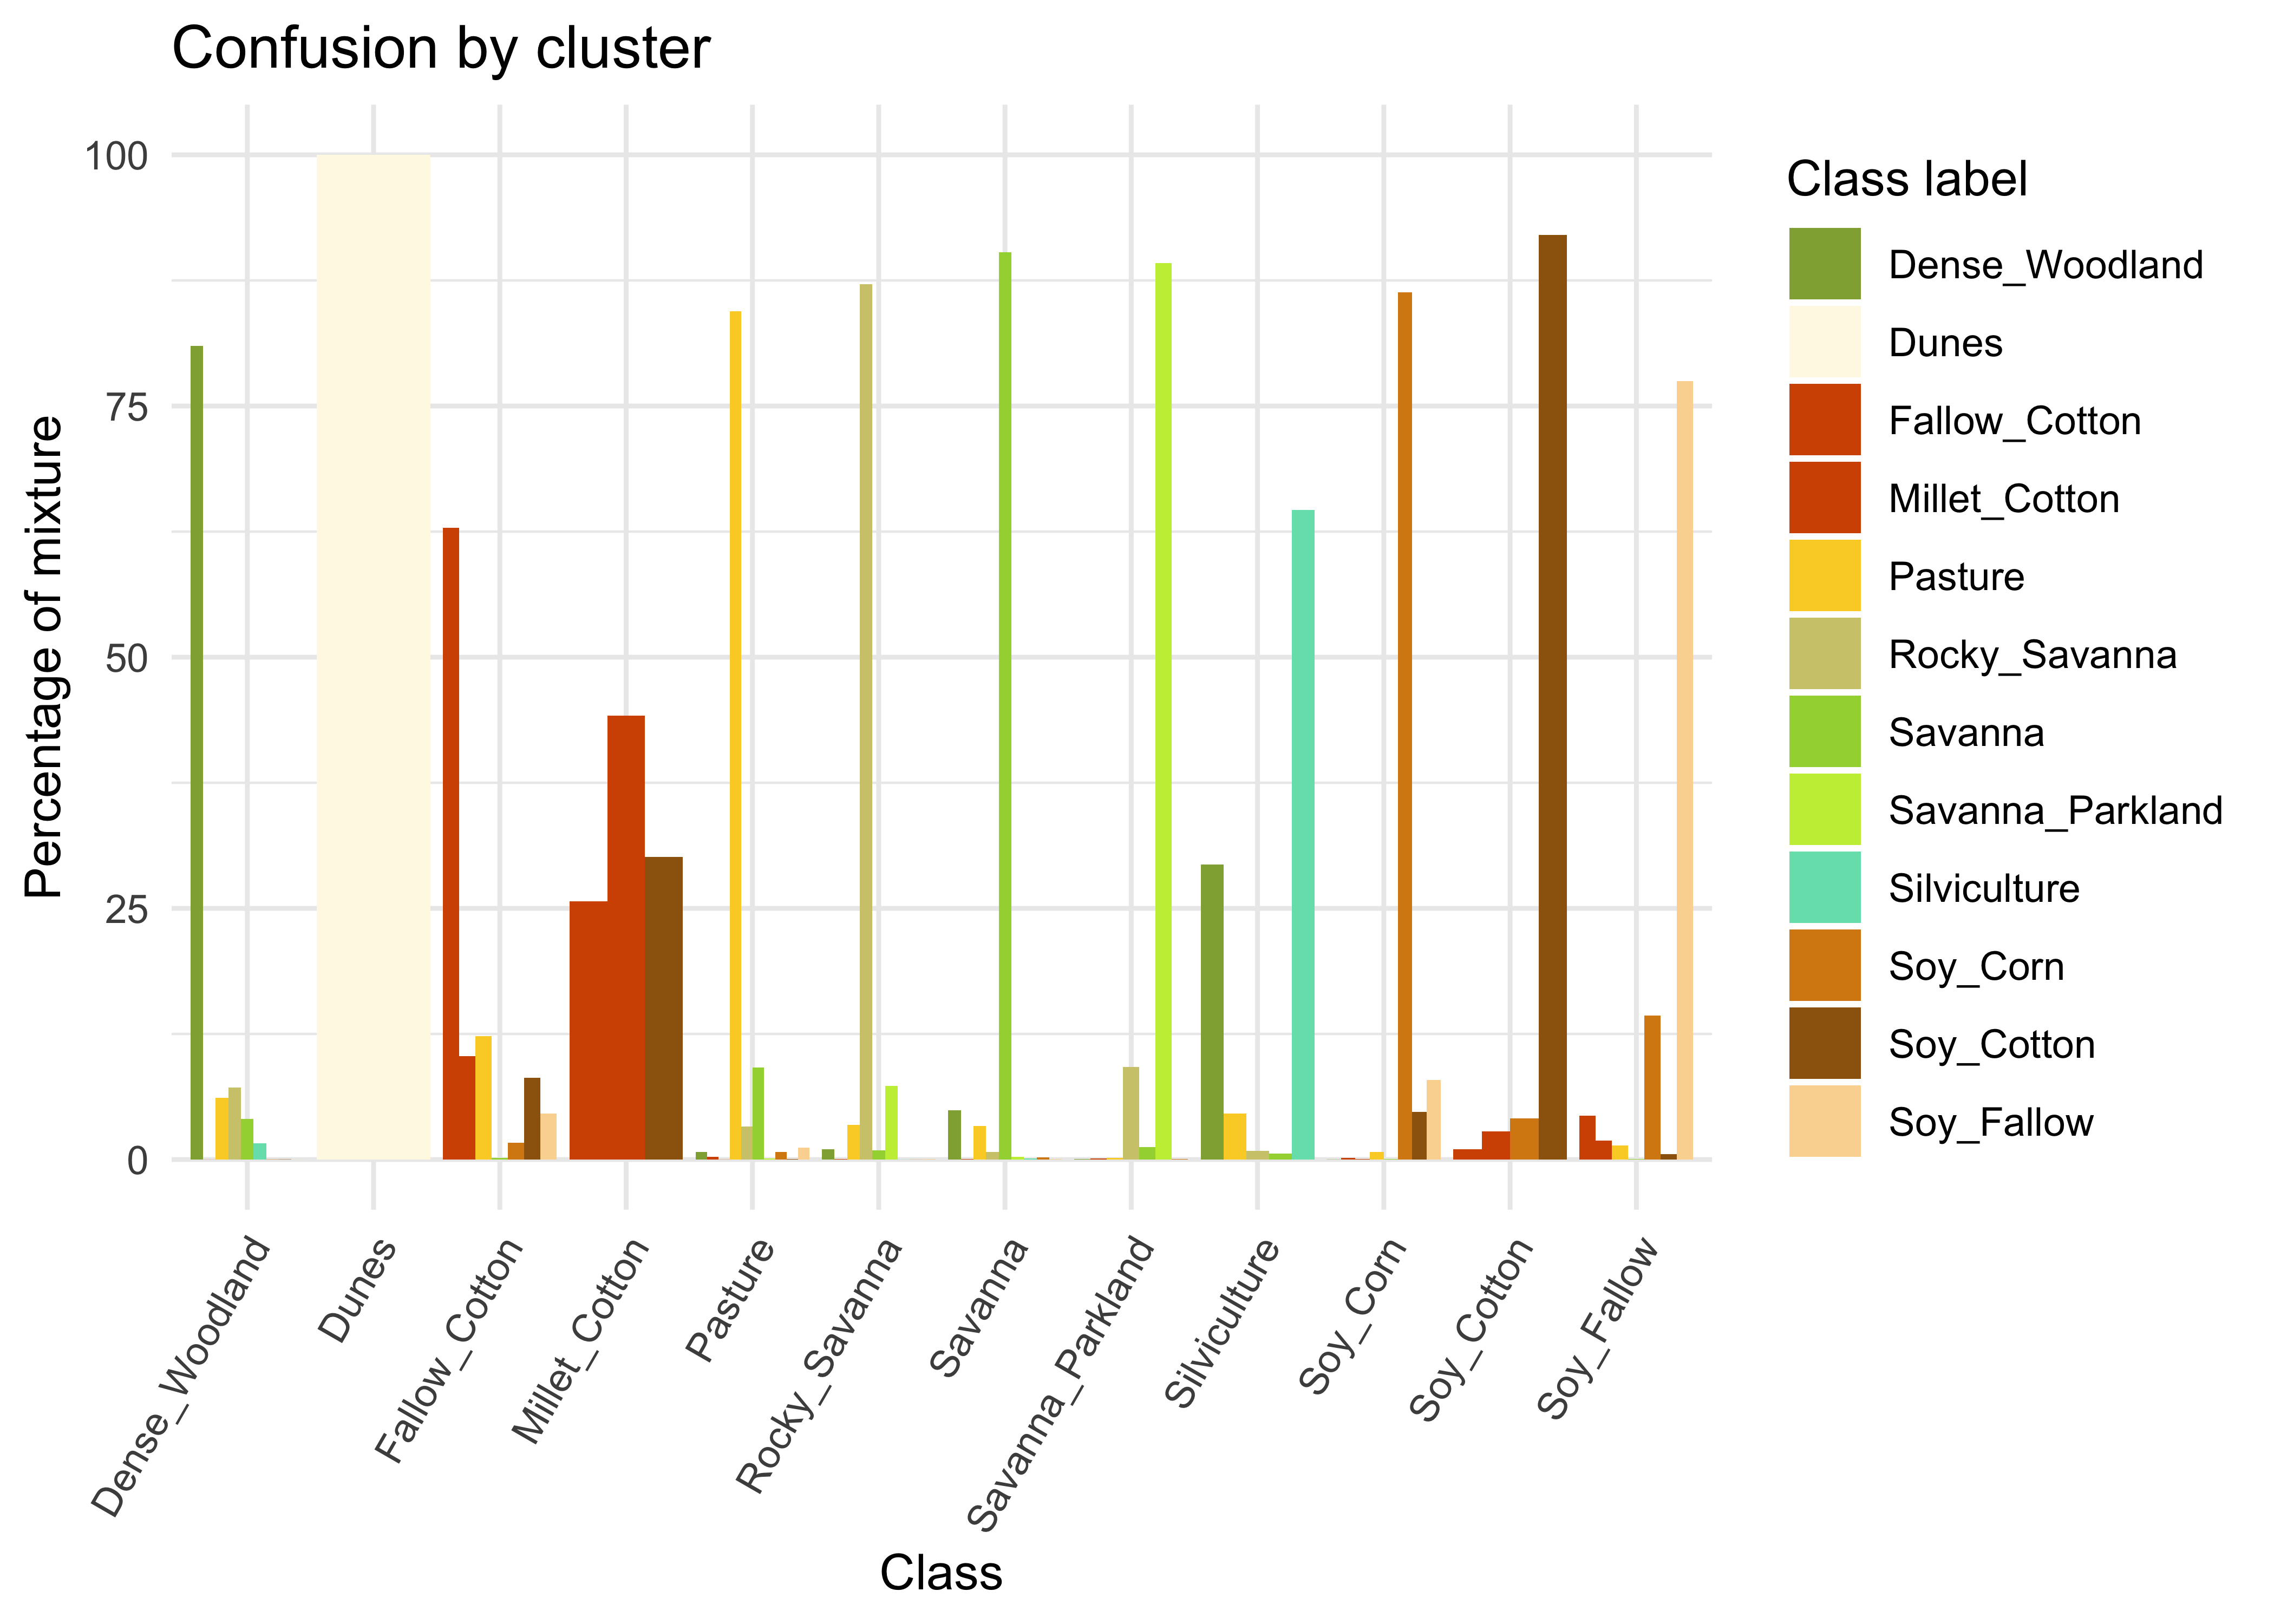 Confusion between classes as measured by SOM (Source: Authors).